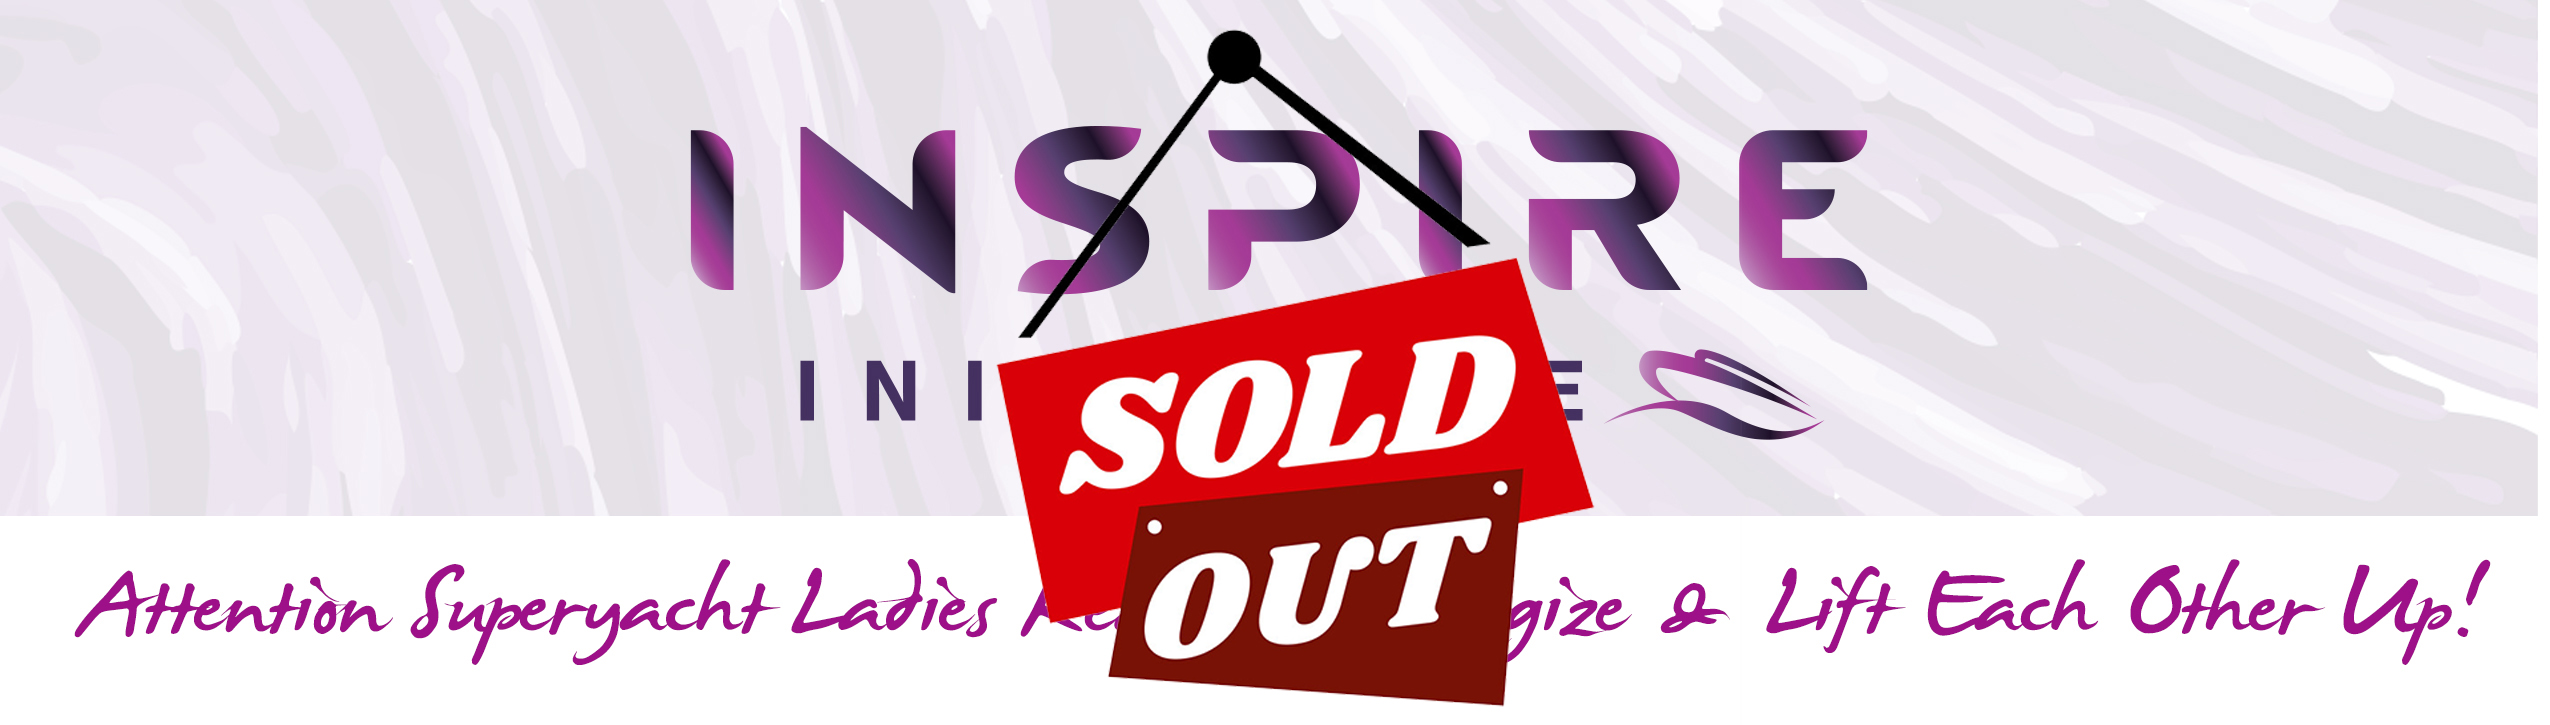 Inspire Header_ SOLD OUT